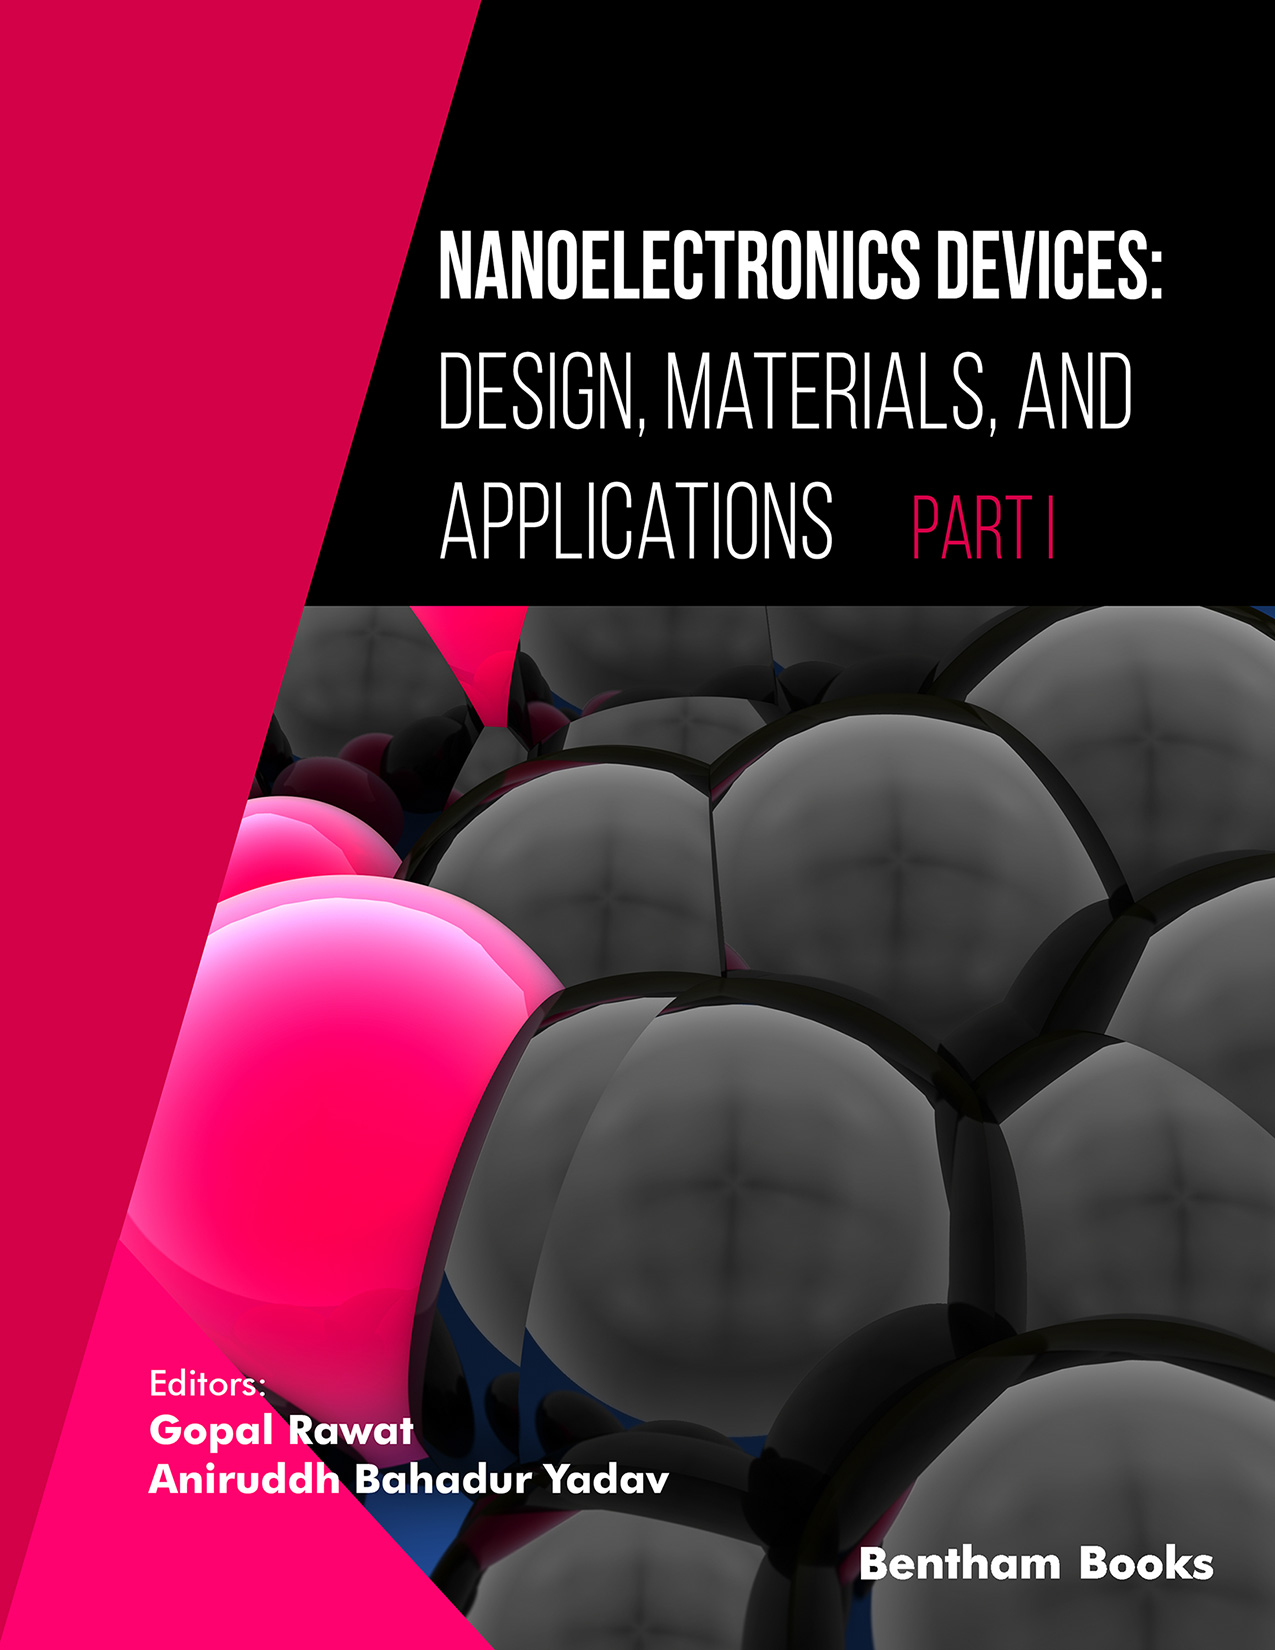 Nanoelectronics Devices: Design, Materials, and Applications Part 1